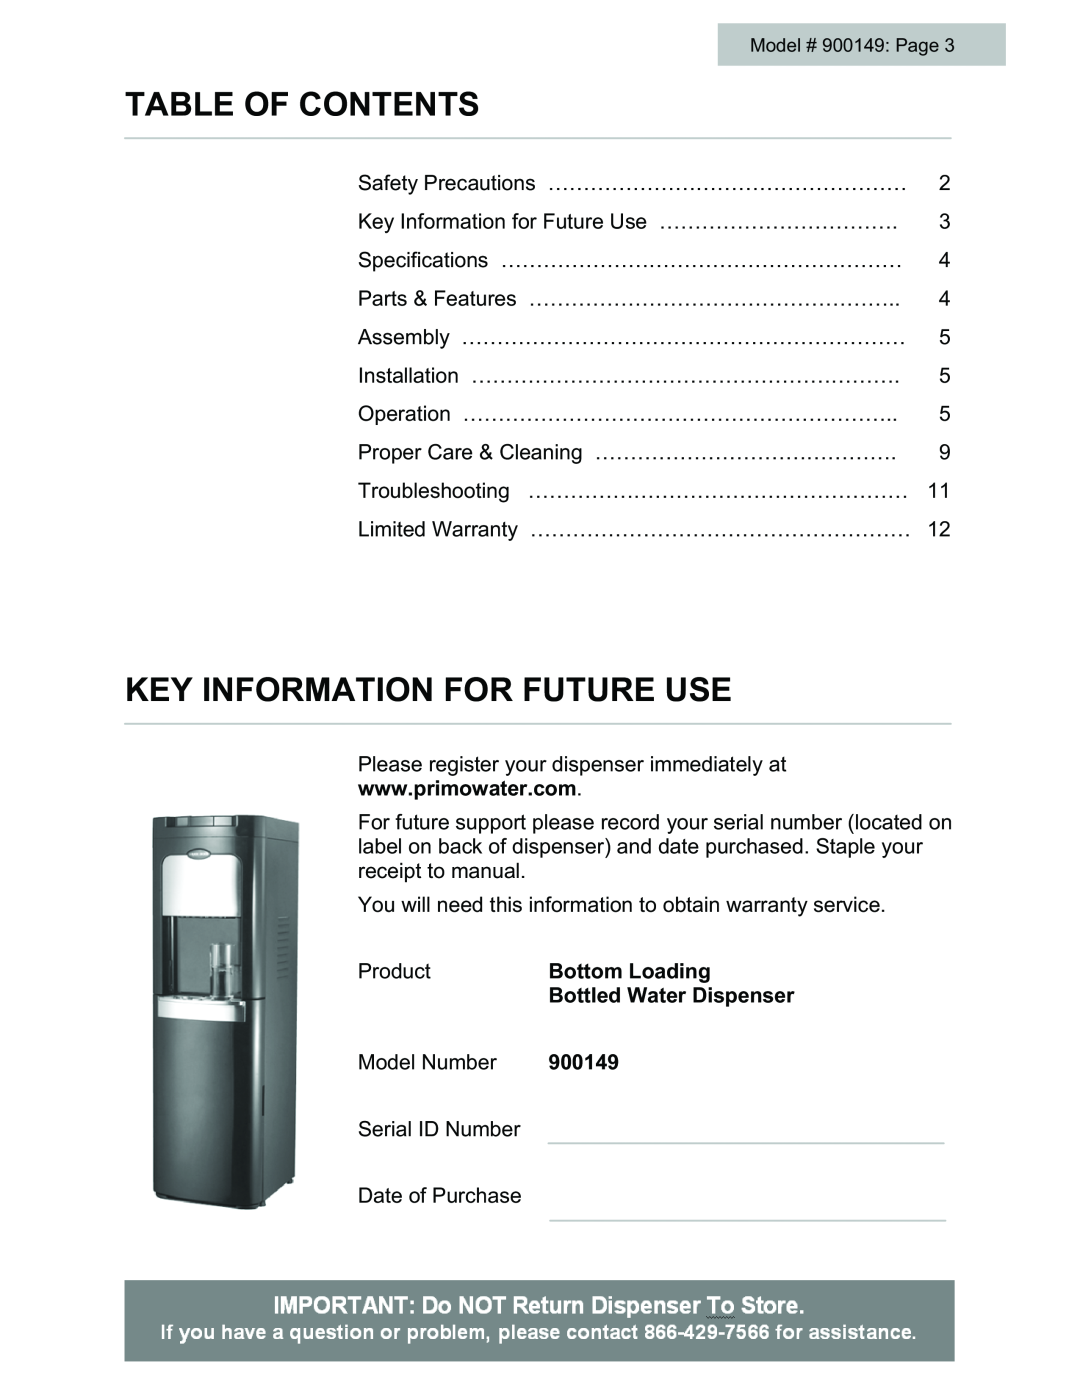 Black & Decker # 900149 user manual Table Of Contents, Key Information For Future Use, Product, Bottom Loading 